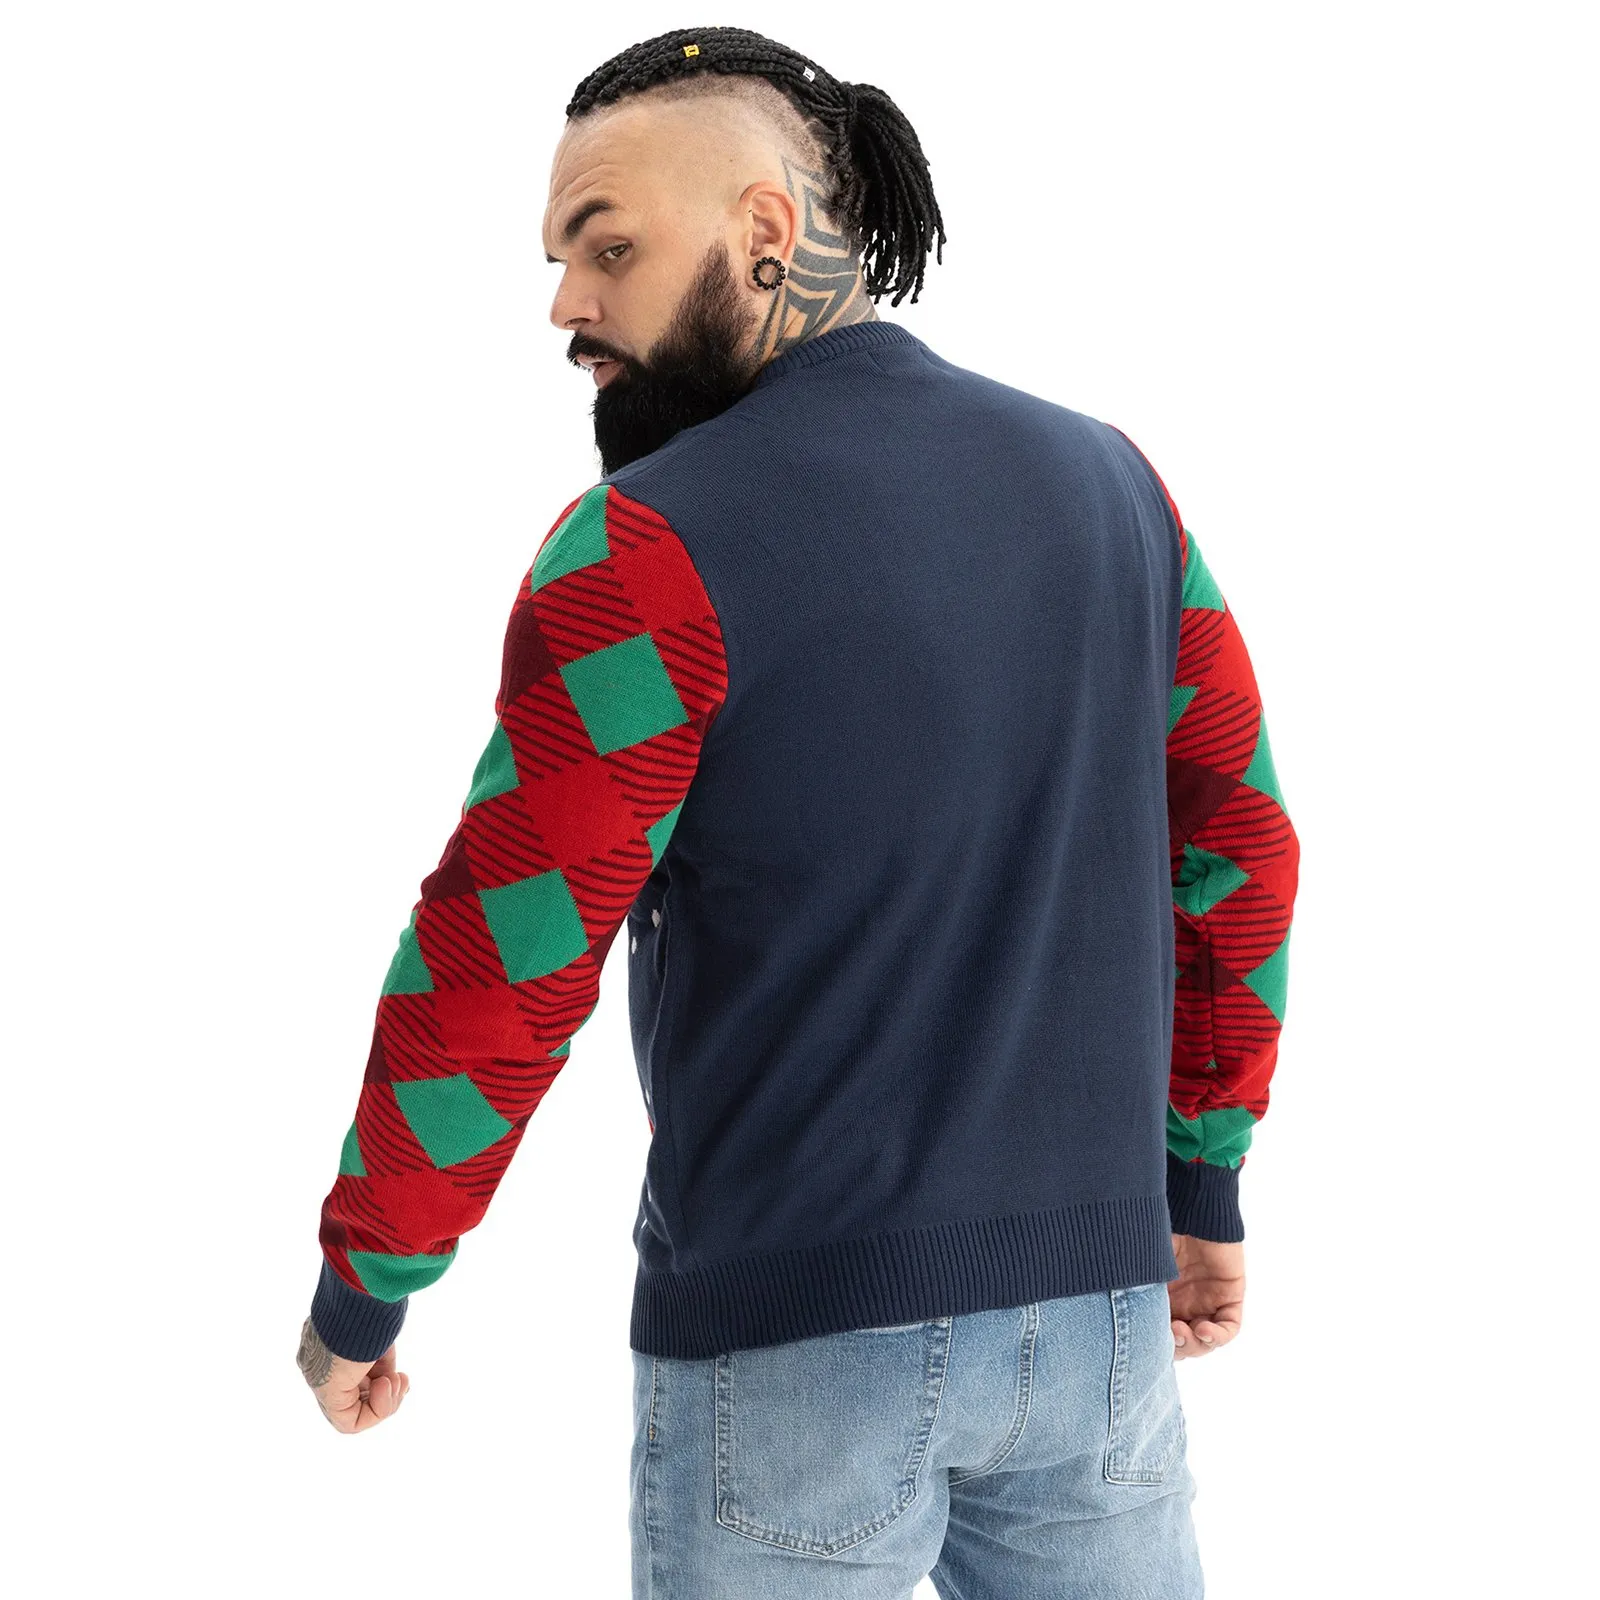 Full on Festive Funny Ugly Mens Christmas Sweater